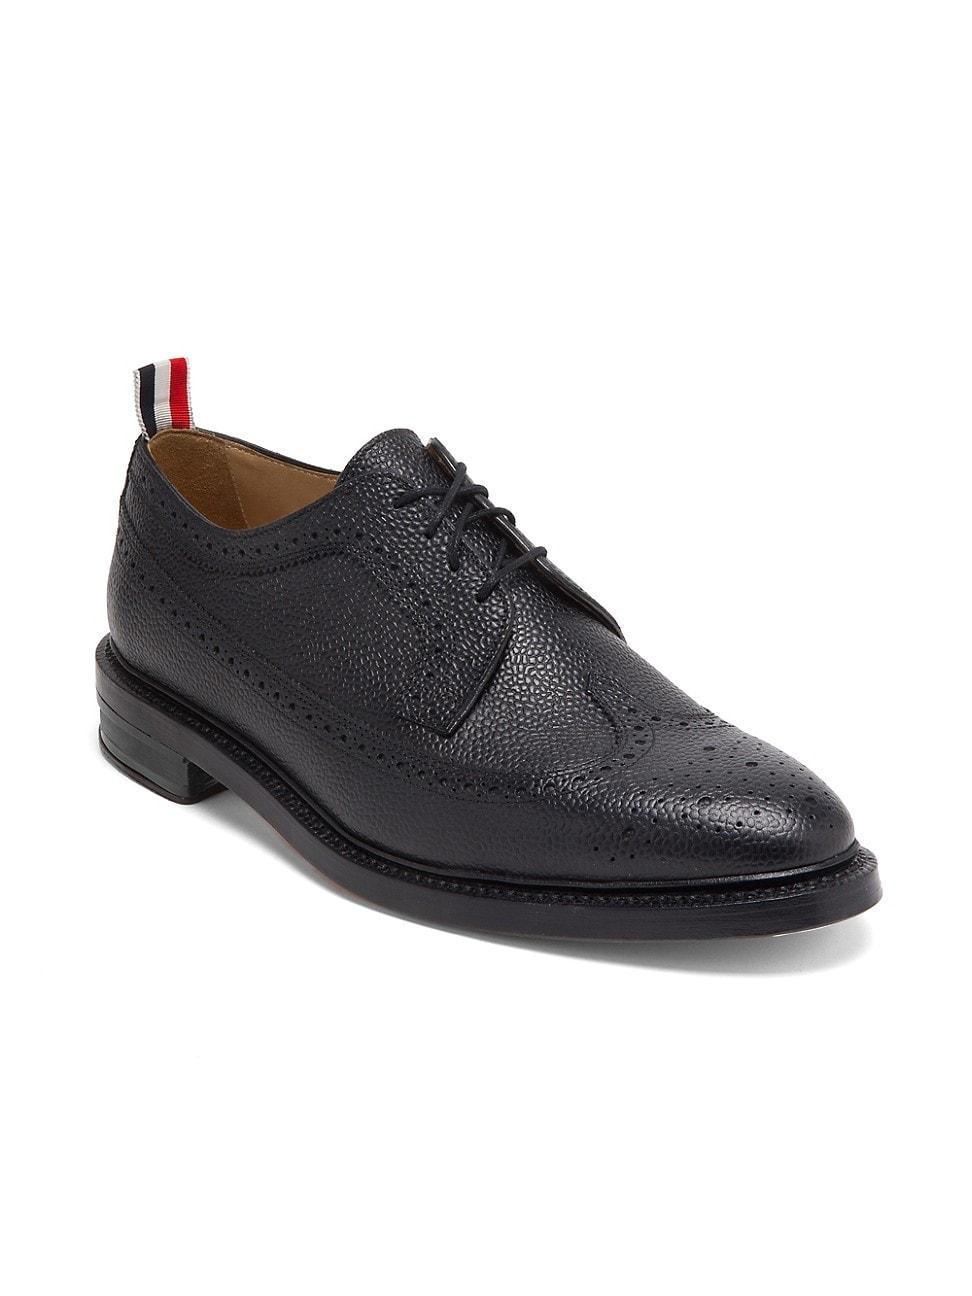 Thom Browne Longwing Derby Product Image